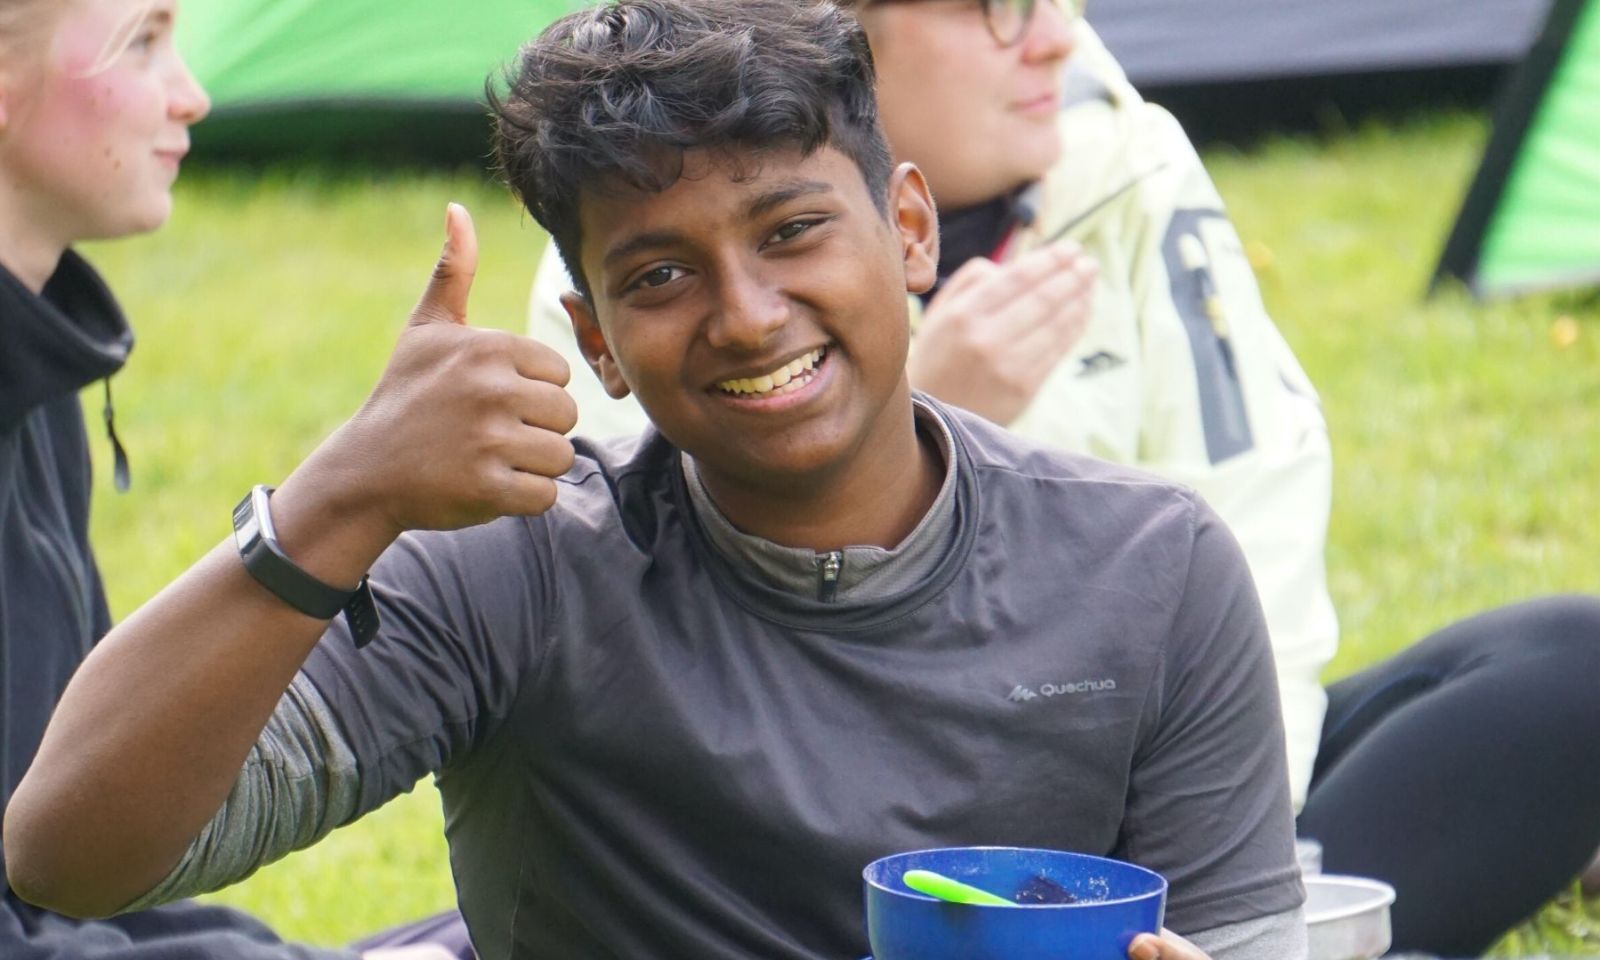 Young man on DofE giving thumbs up and big smile.